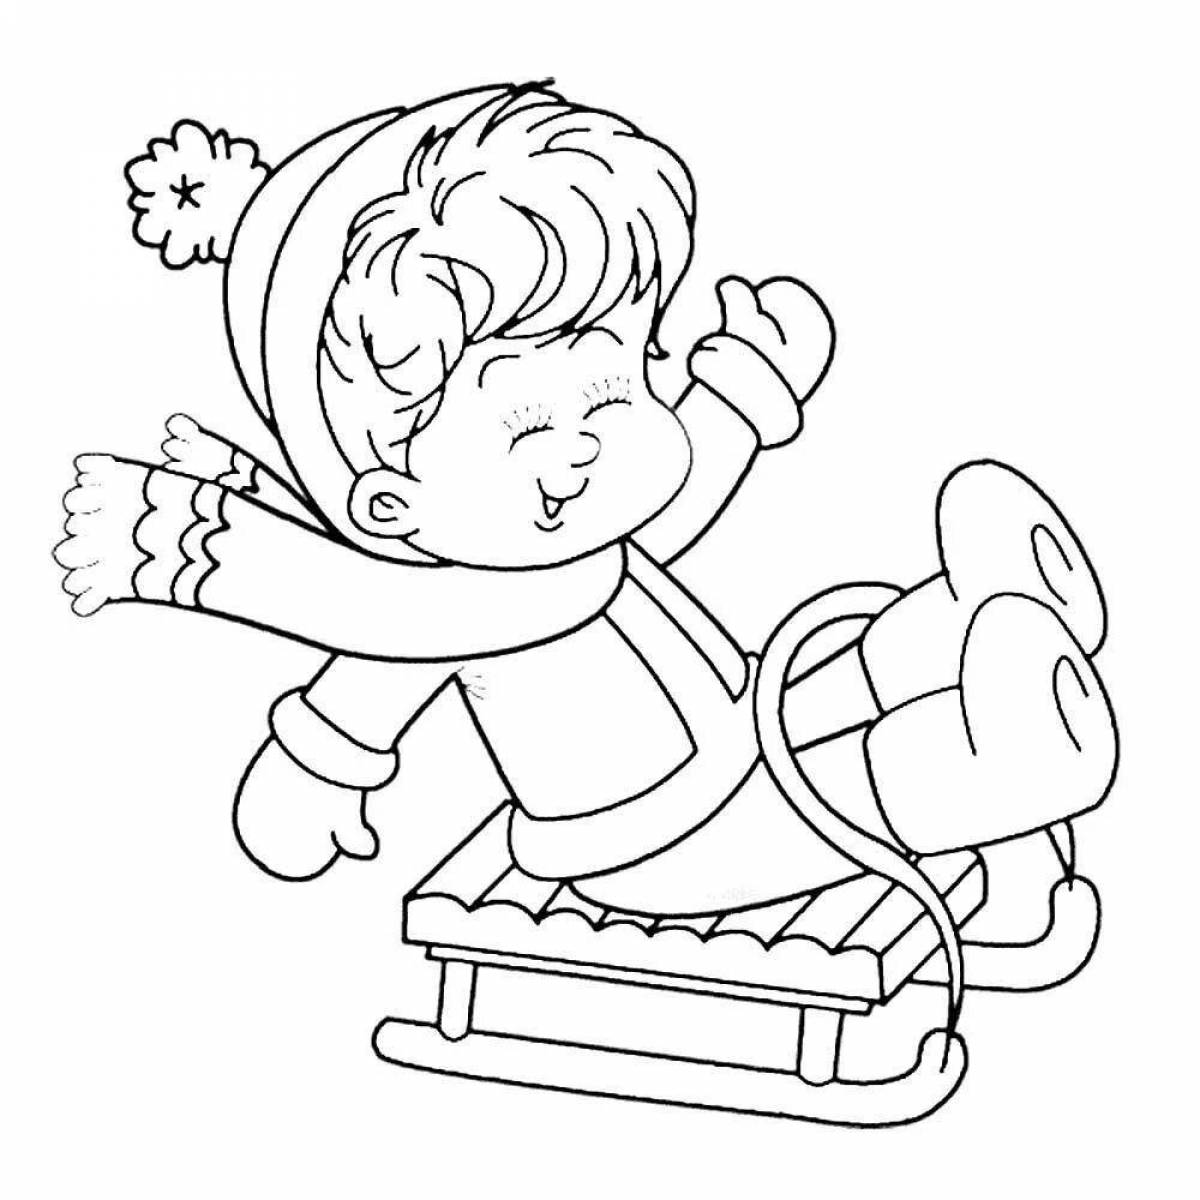 Lively coloring for children on a sled